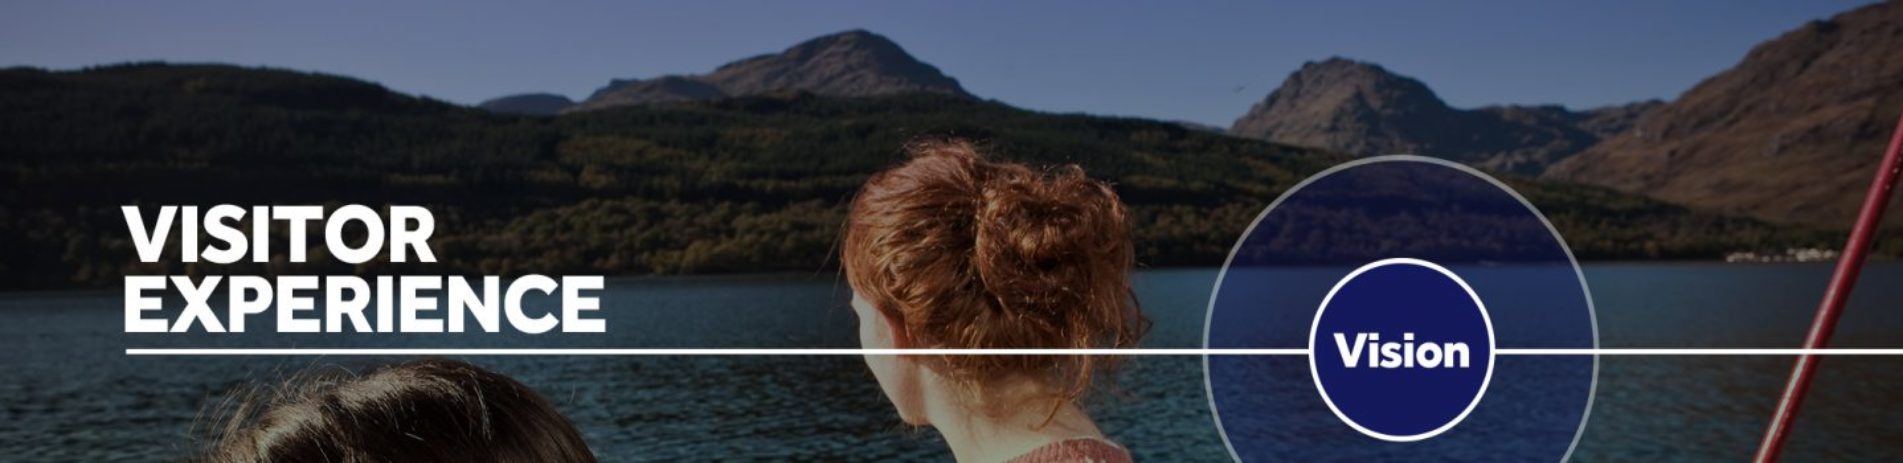 visitor-experience-banner-image-loch-mountains